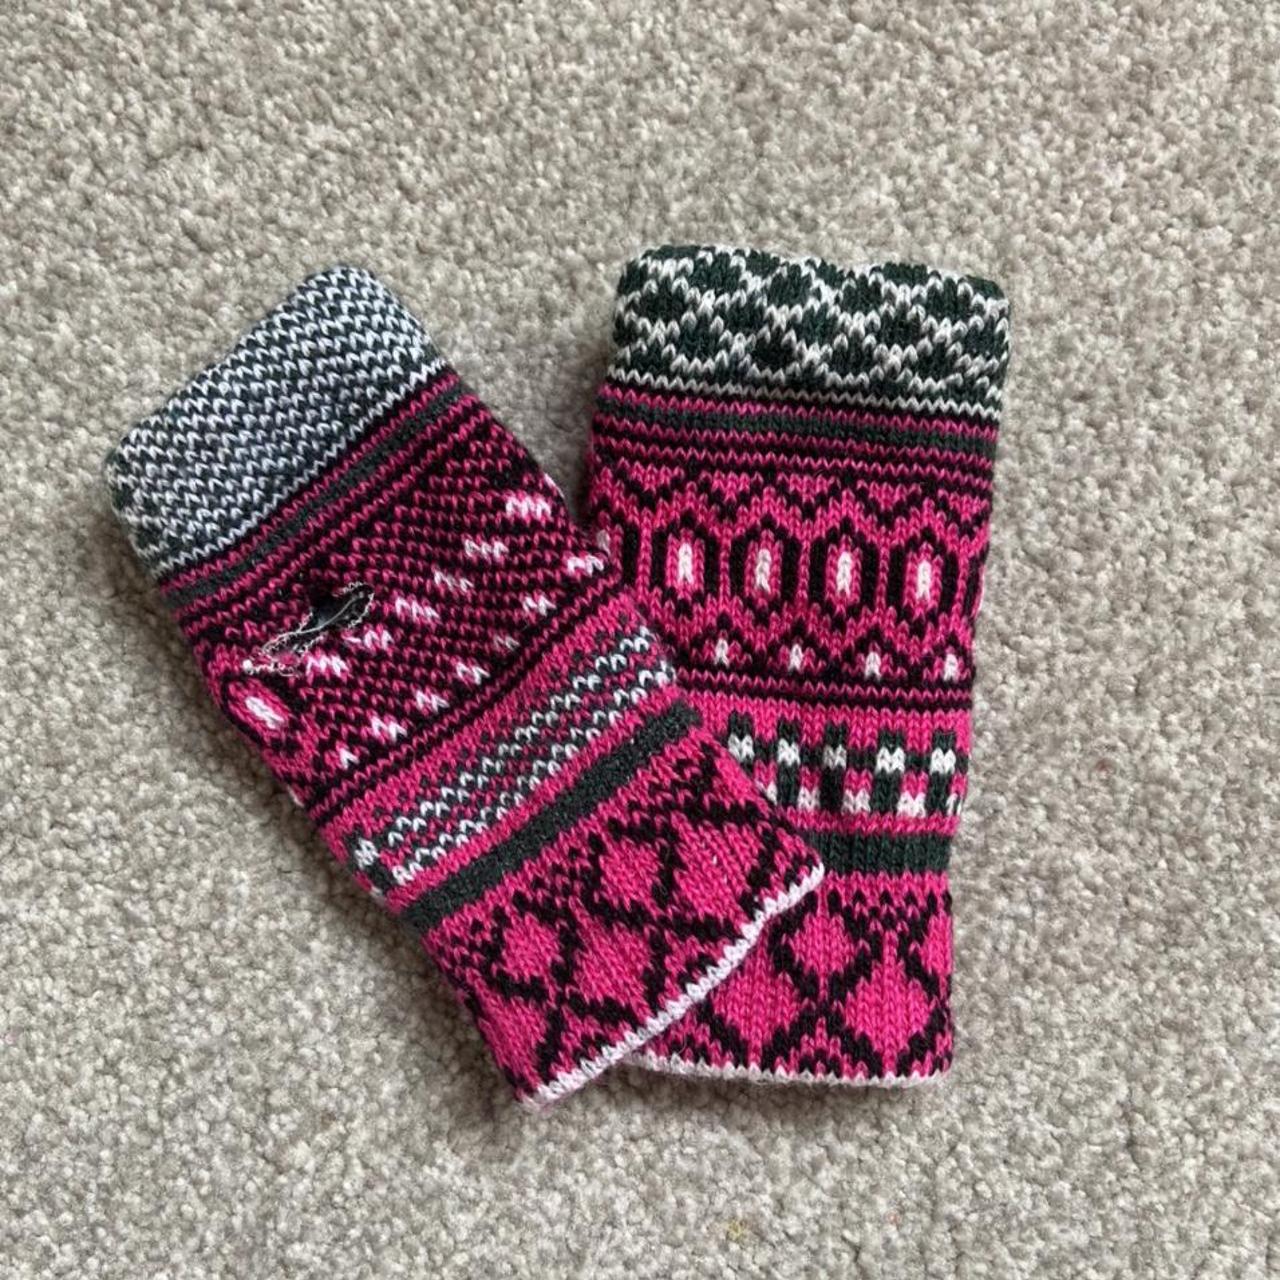 Product Image 1 - Pink patterned mittens💖
Thick knitted 
Fingerless,